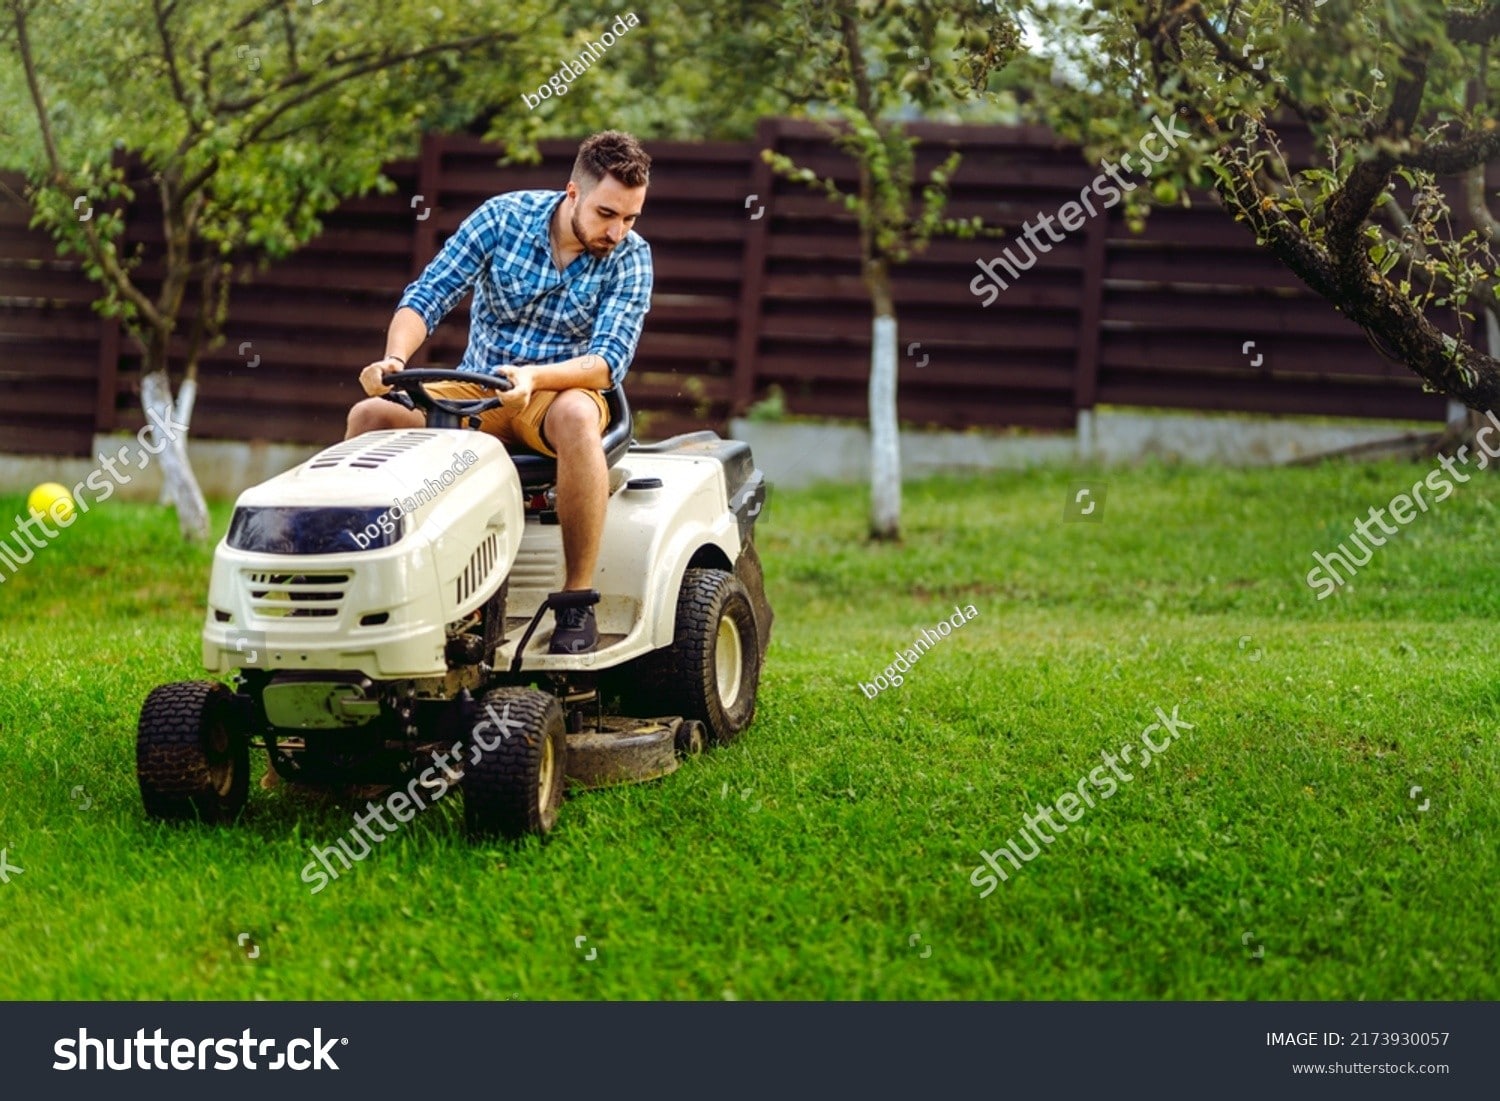 Lawnmower repairs and servicing